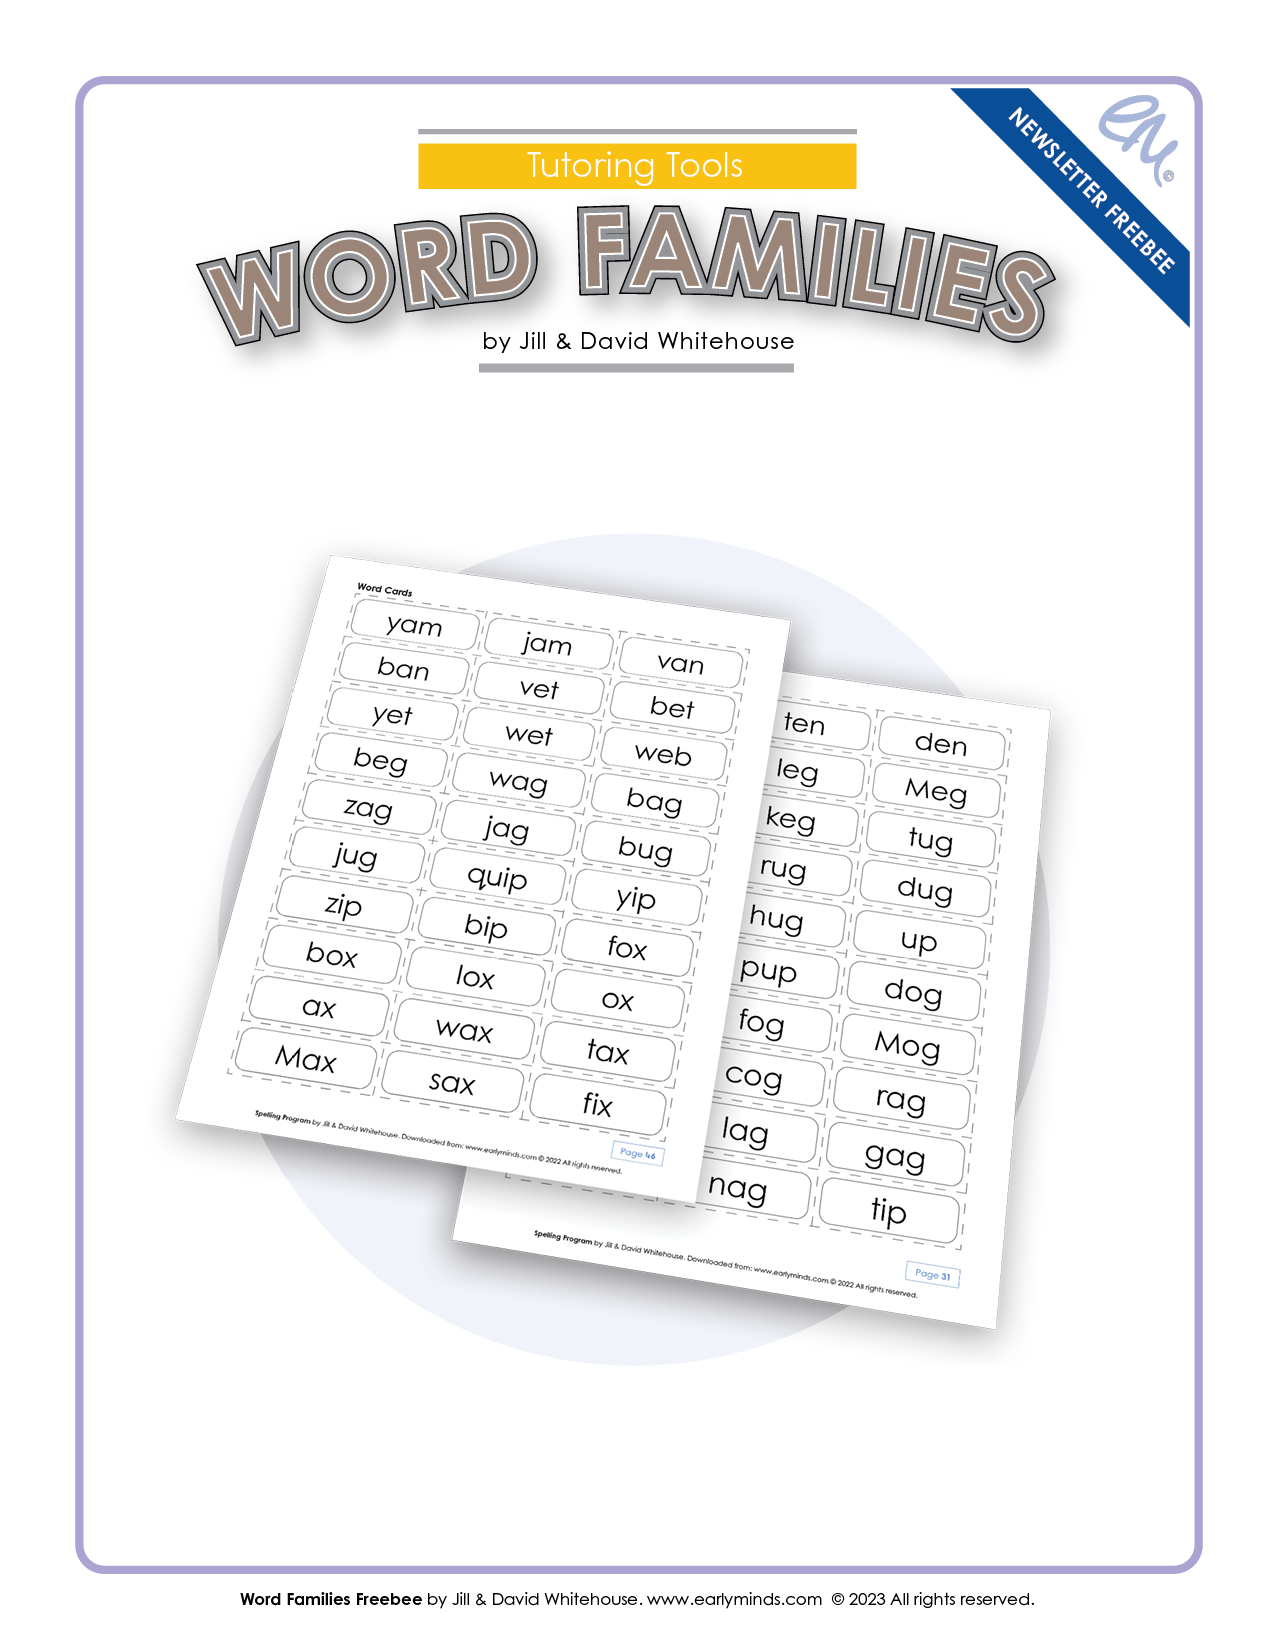 word families download cover